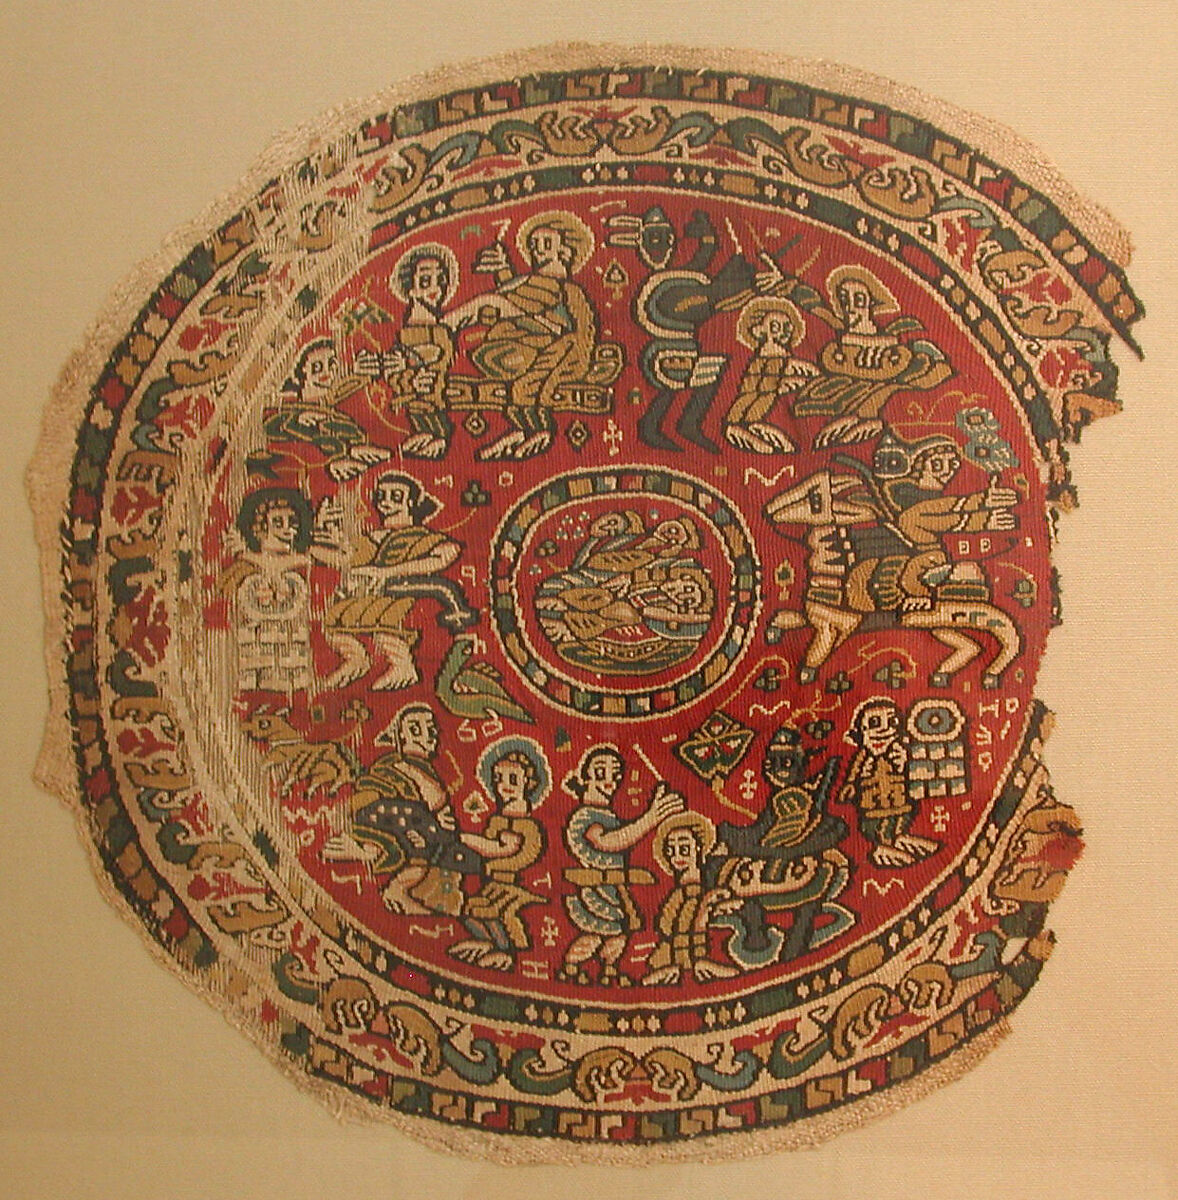 Roundel Illustrating Episodes from the Biblical Story of Joseph, Linen, wool; tapestry weave 